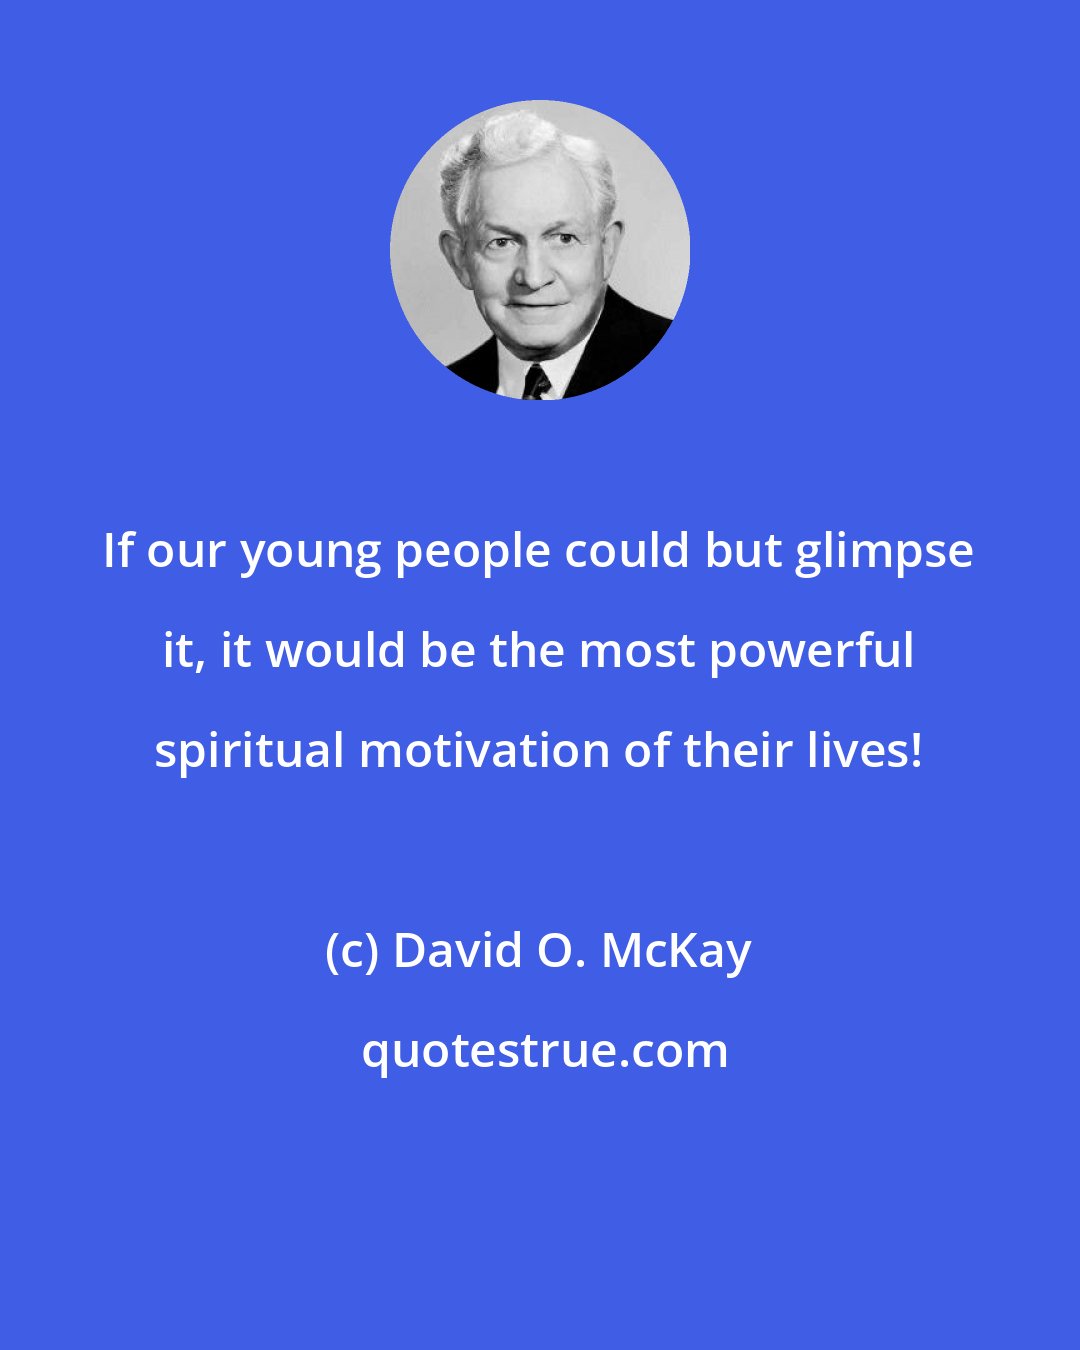 David O. McKay: If our young people could but glimpse it, it would be the most powerful spiritual motivation of their lives!